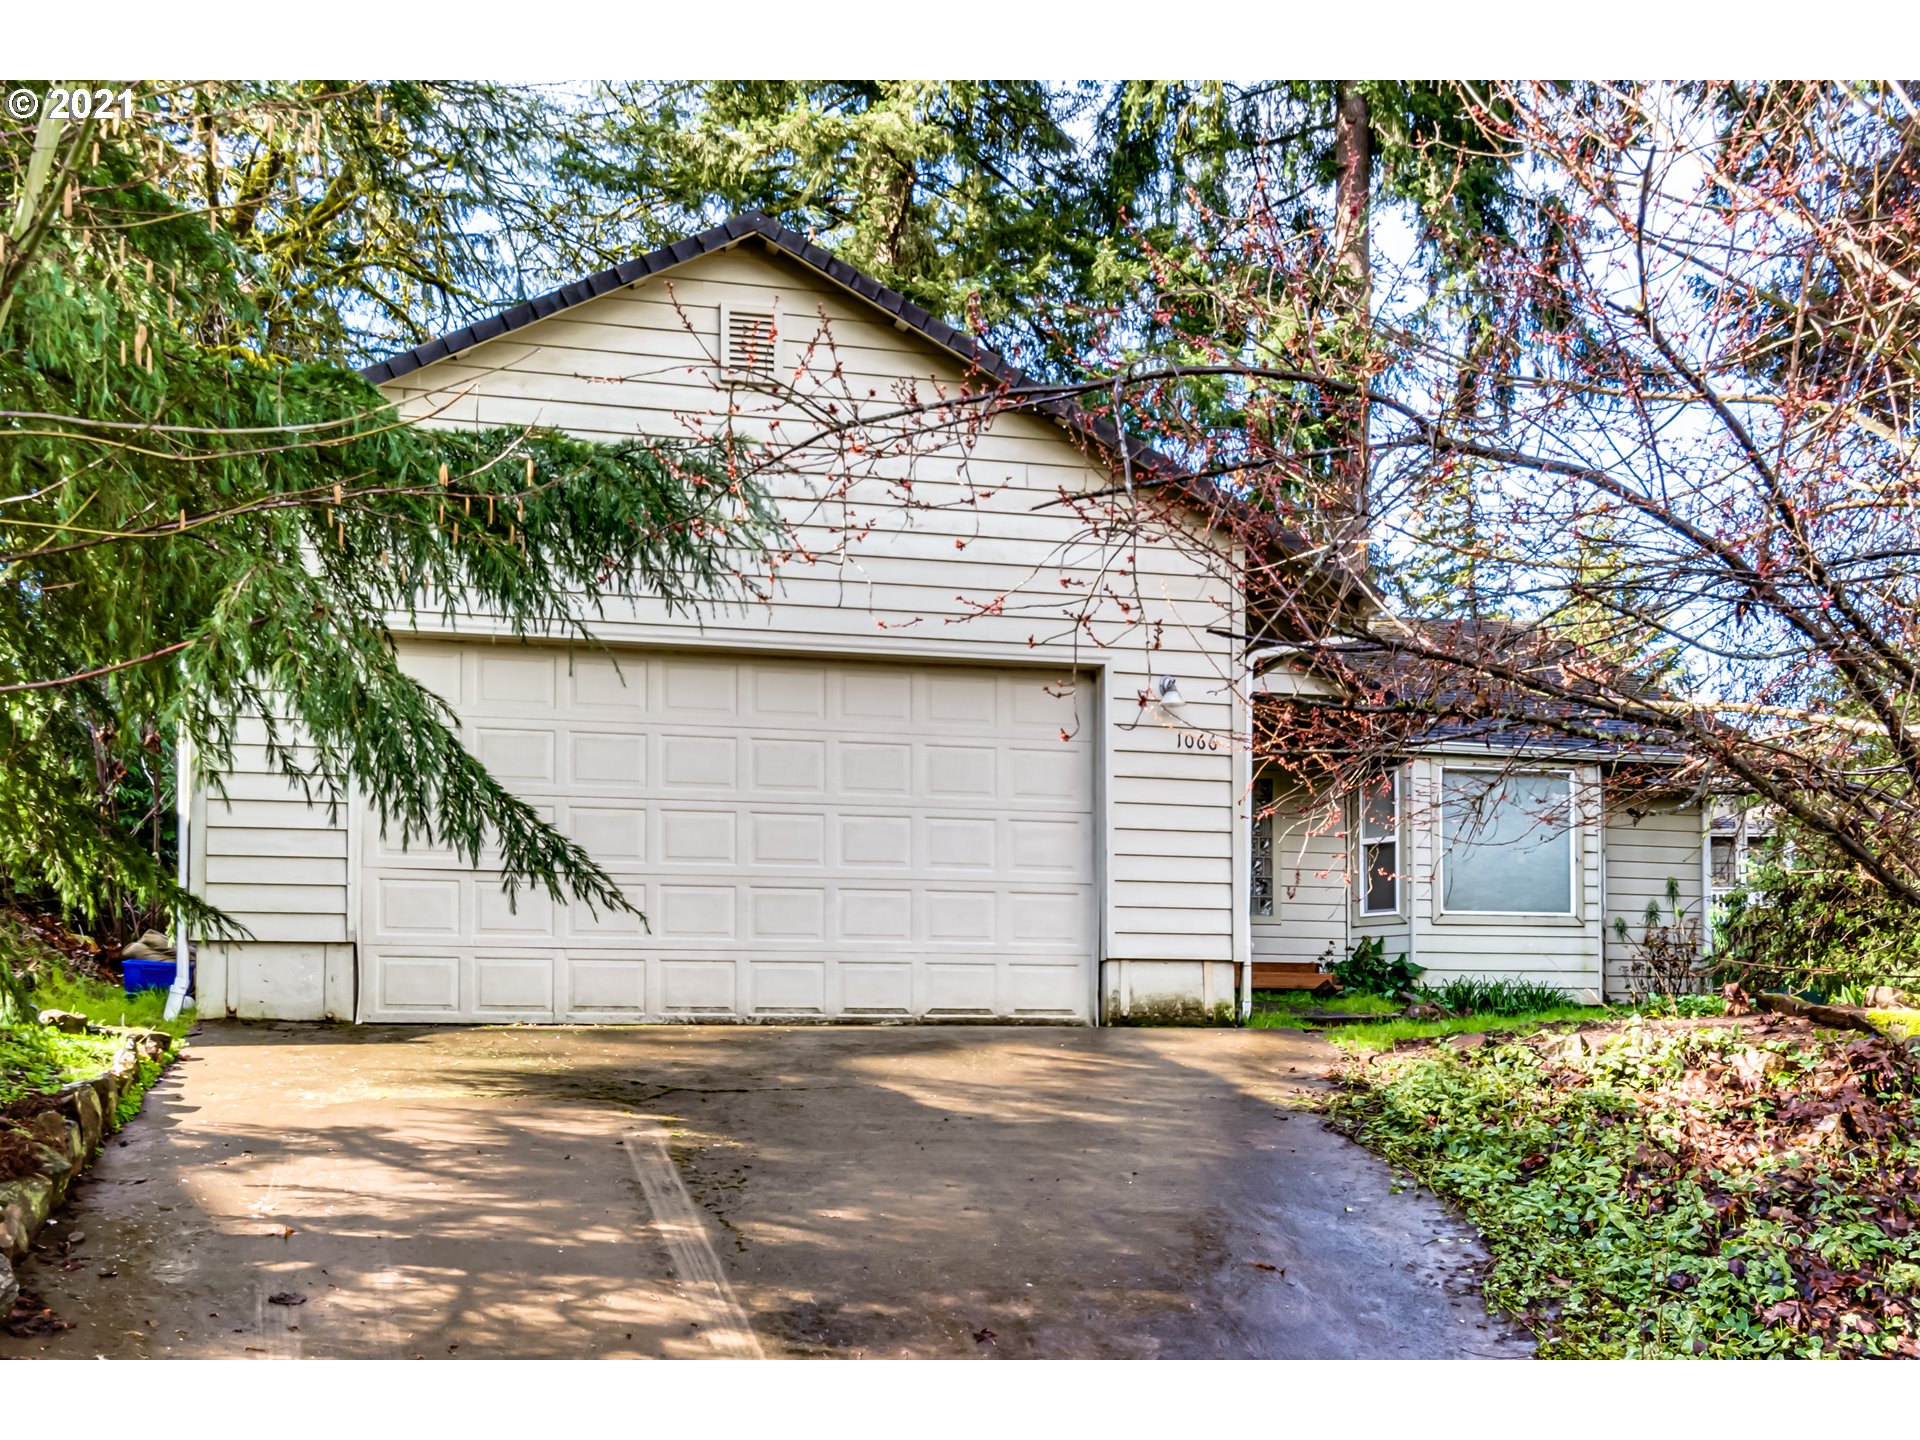 1066 S 69TH PL (1 of 27)